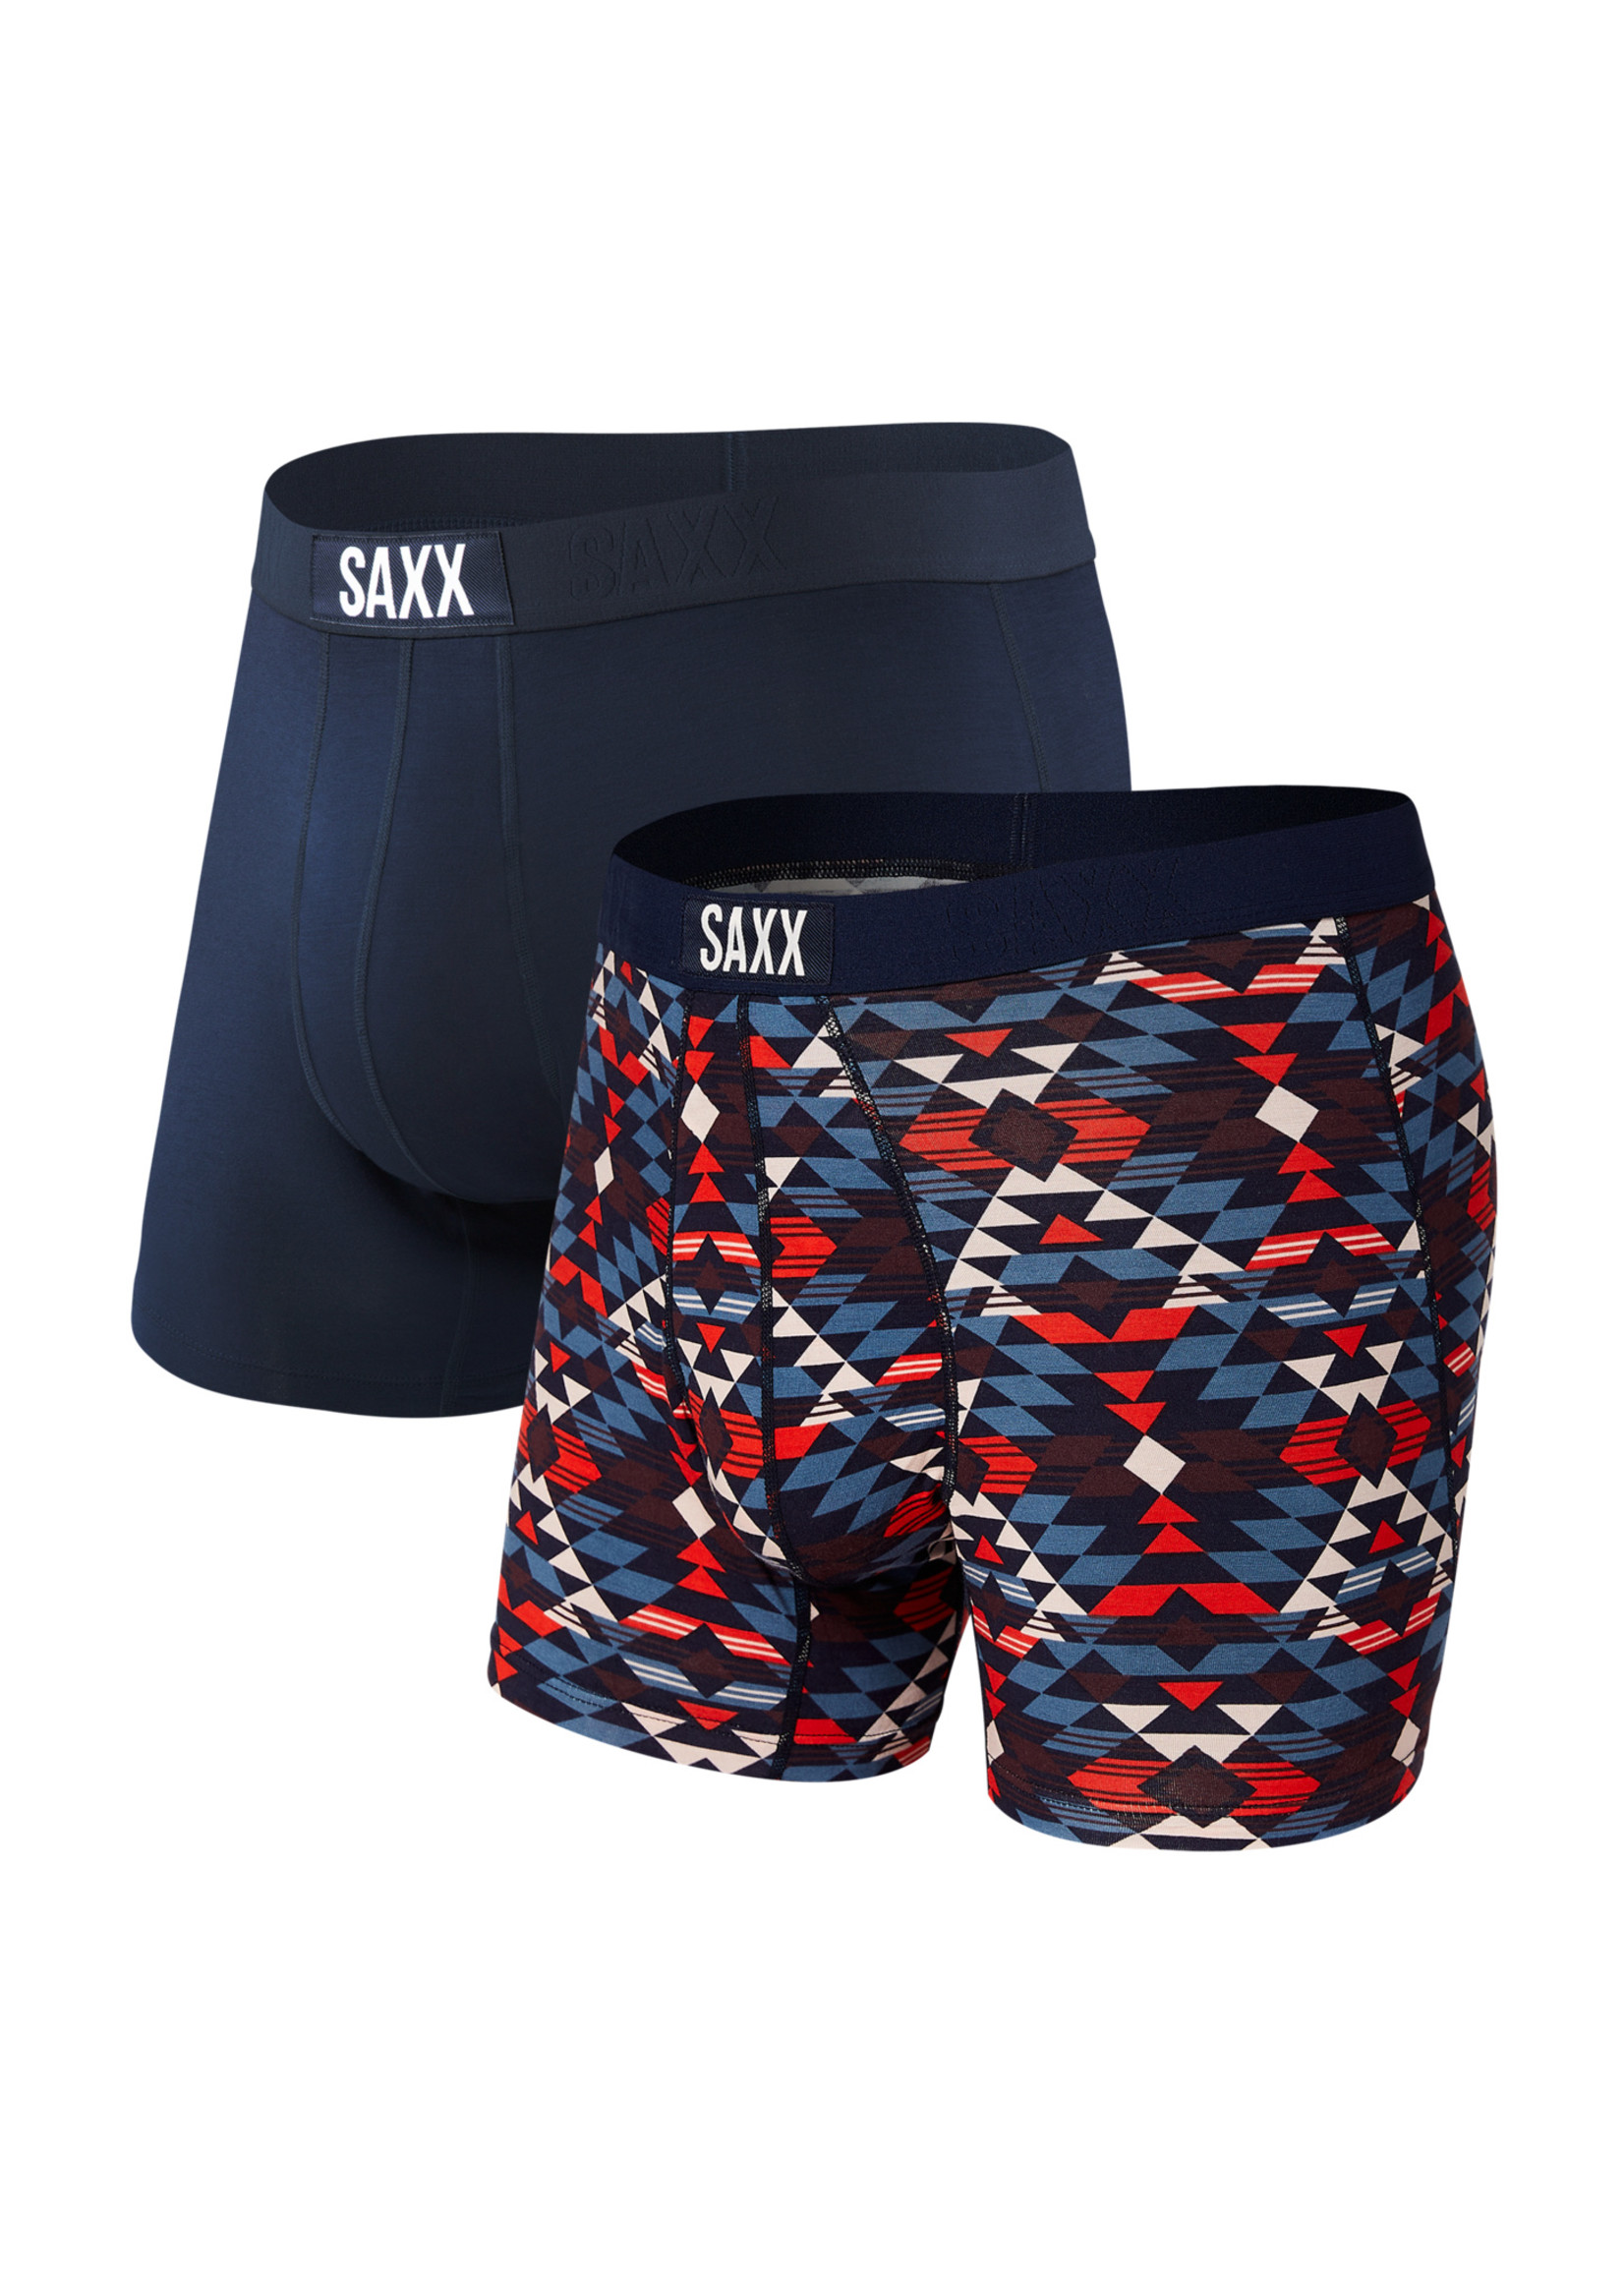 SAXX Vibe Boxer Brief 2 Pack SXPP2V-TWL – My Top Drawer